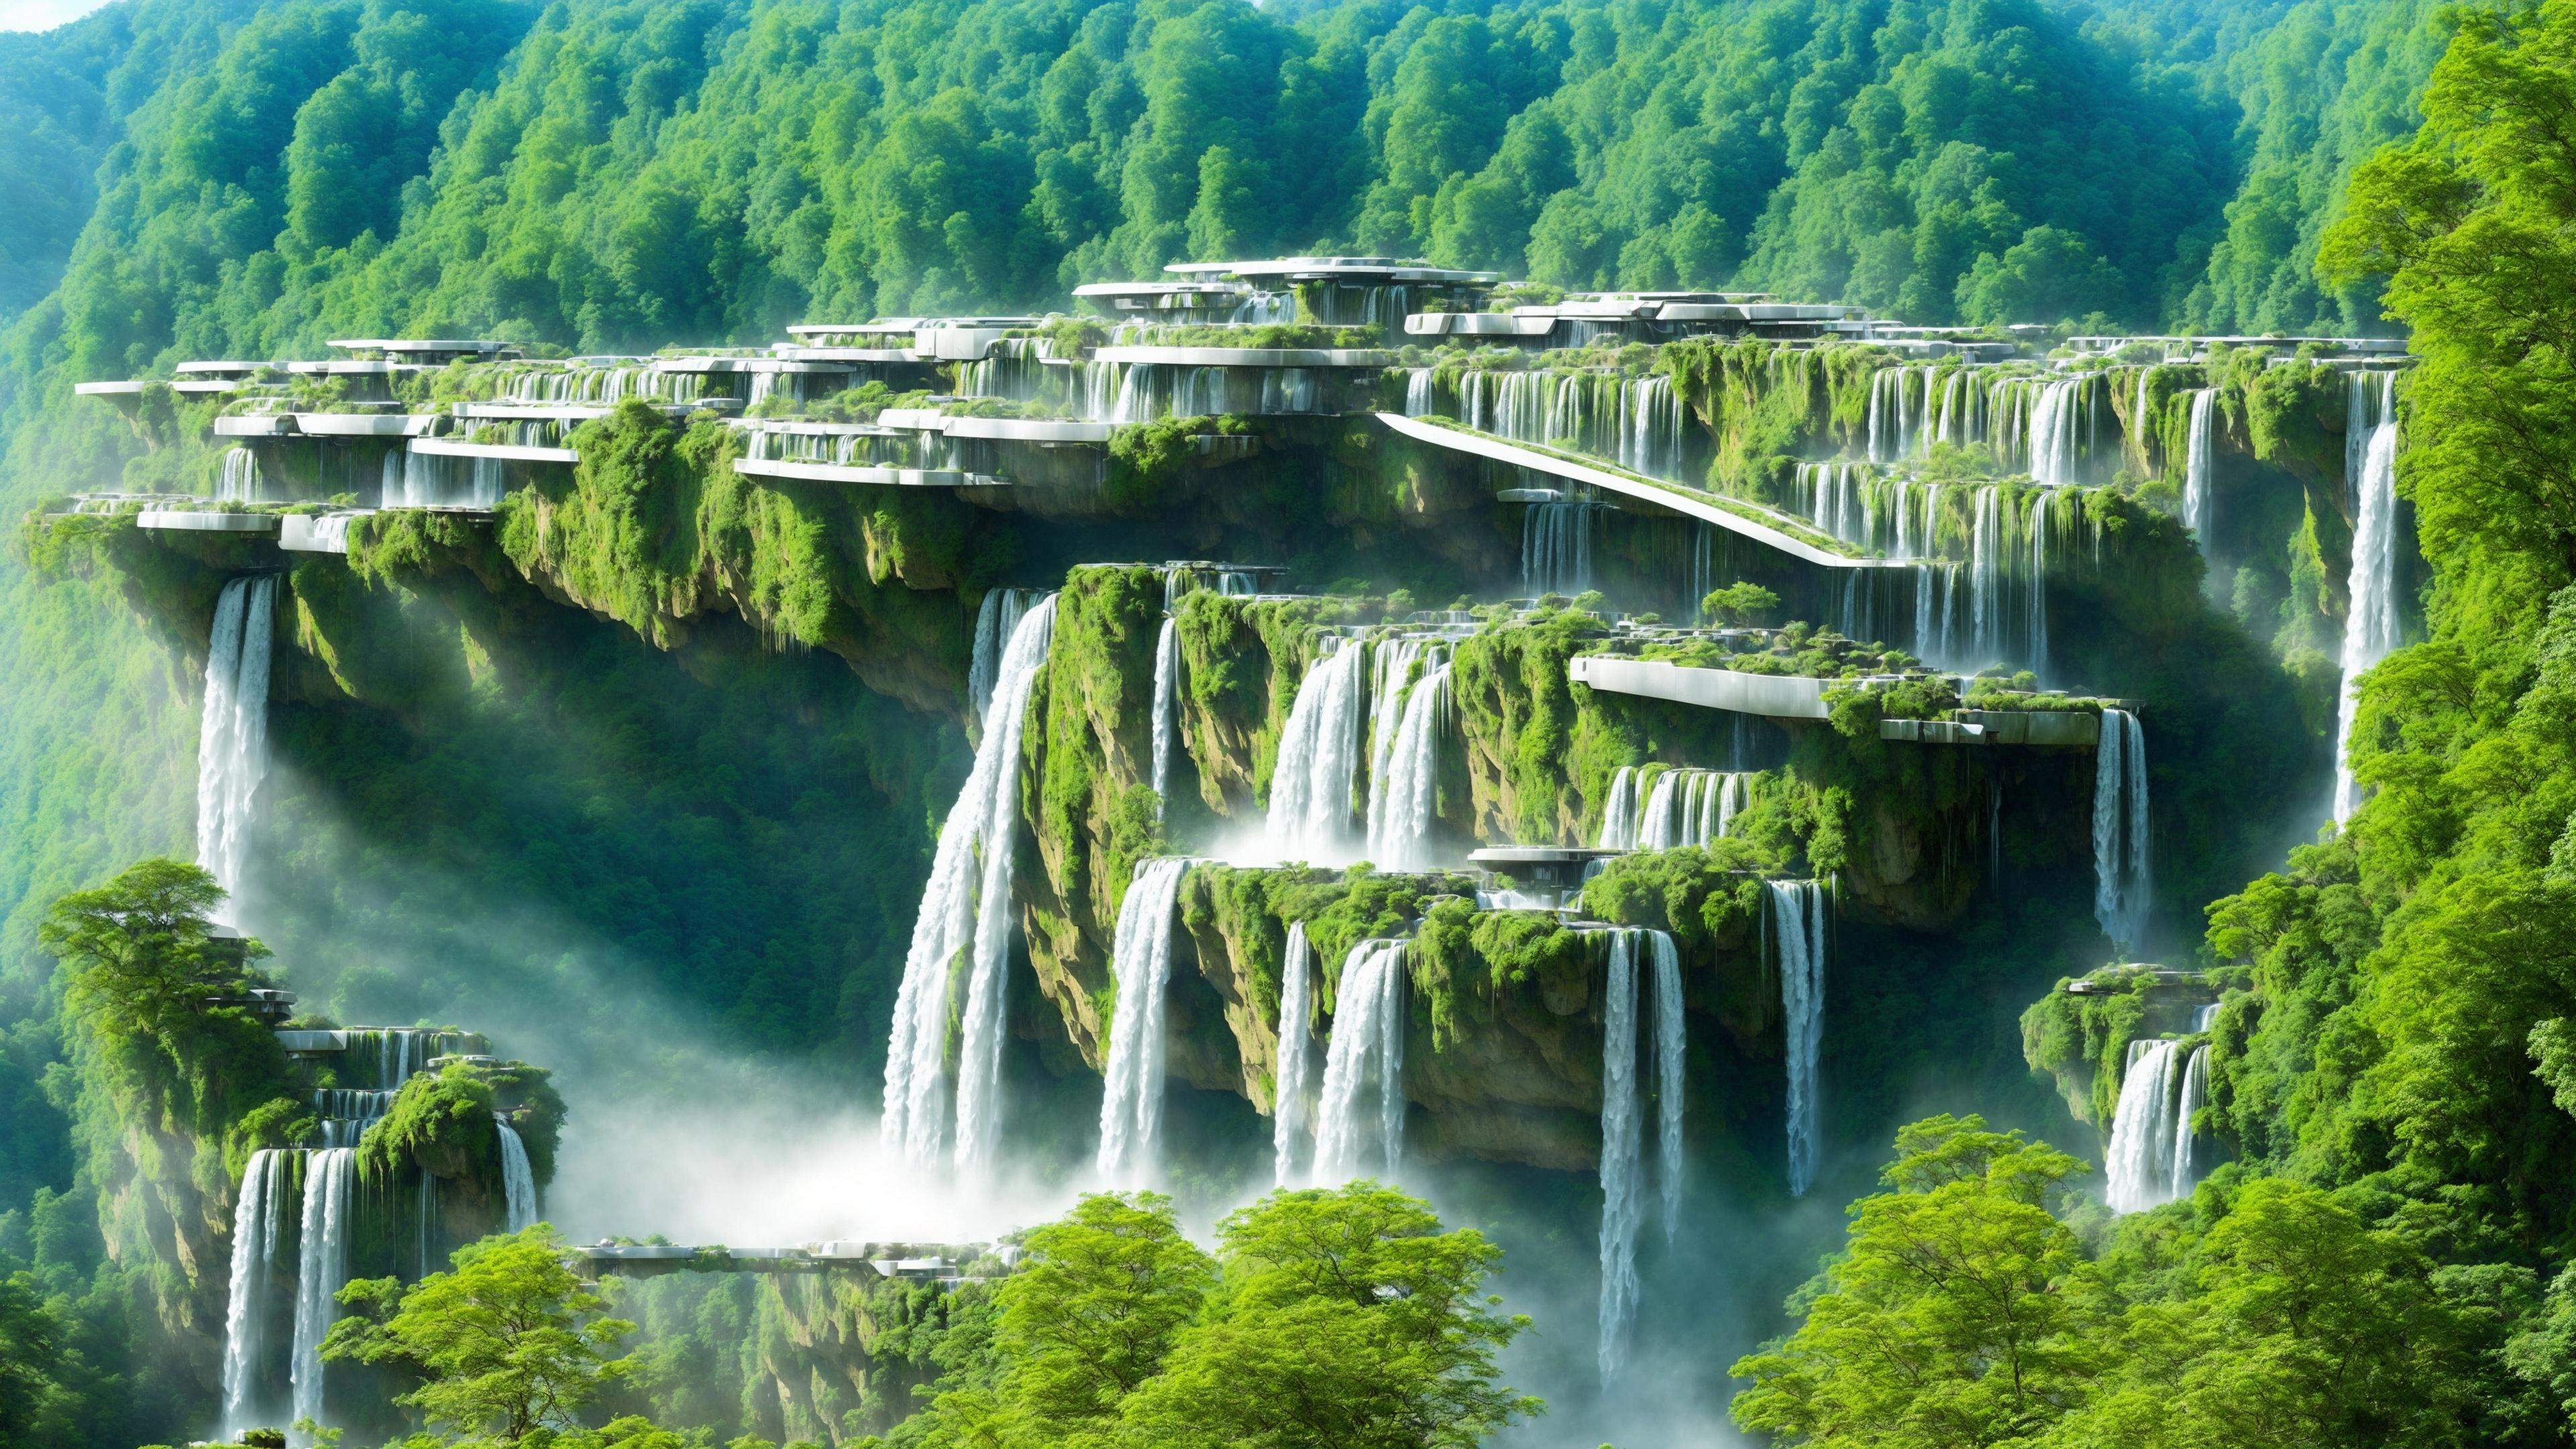 An unusual place with fantastic waterfalls